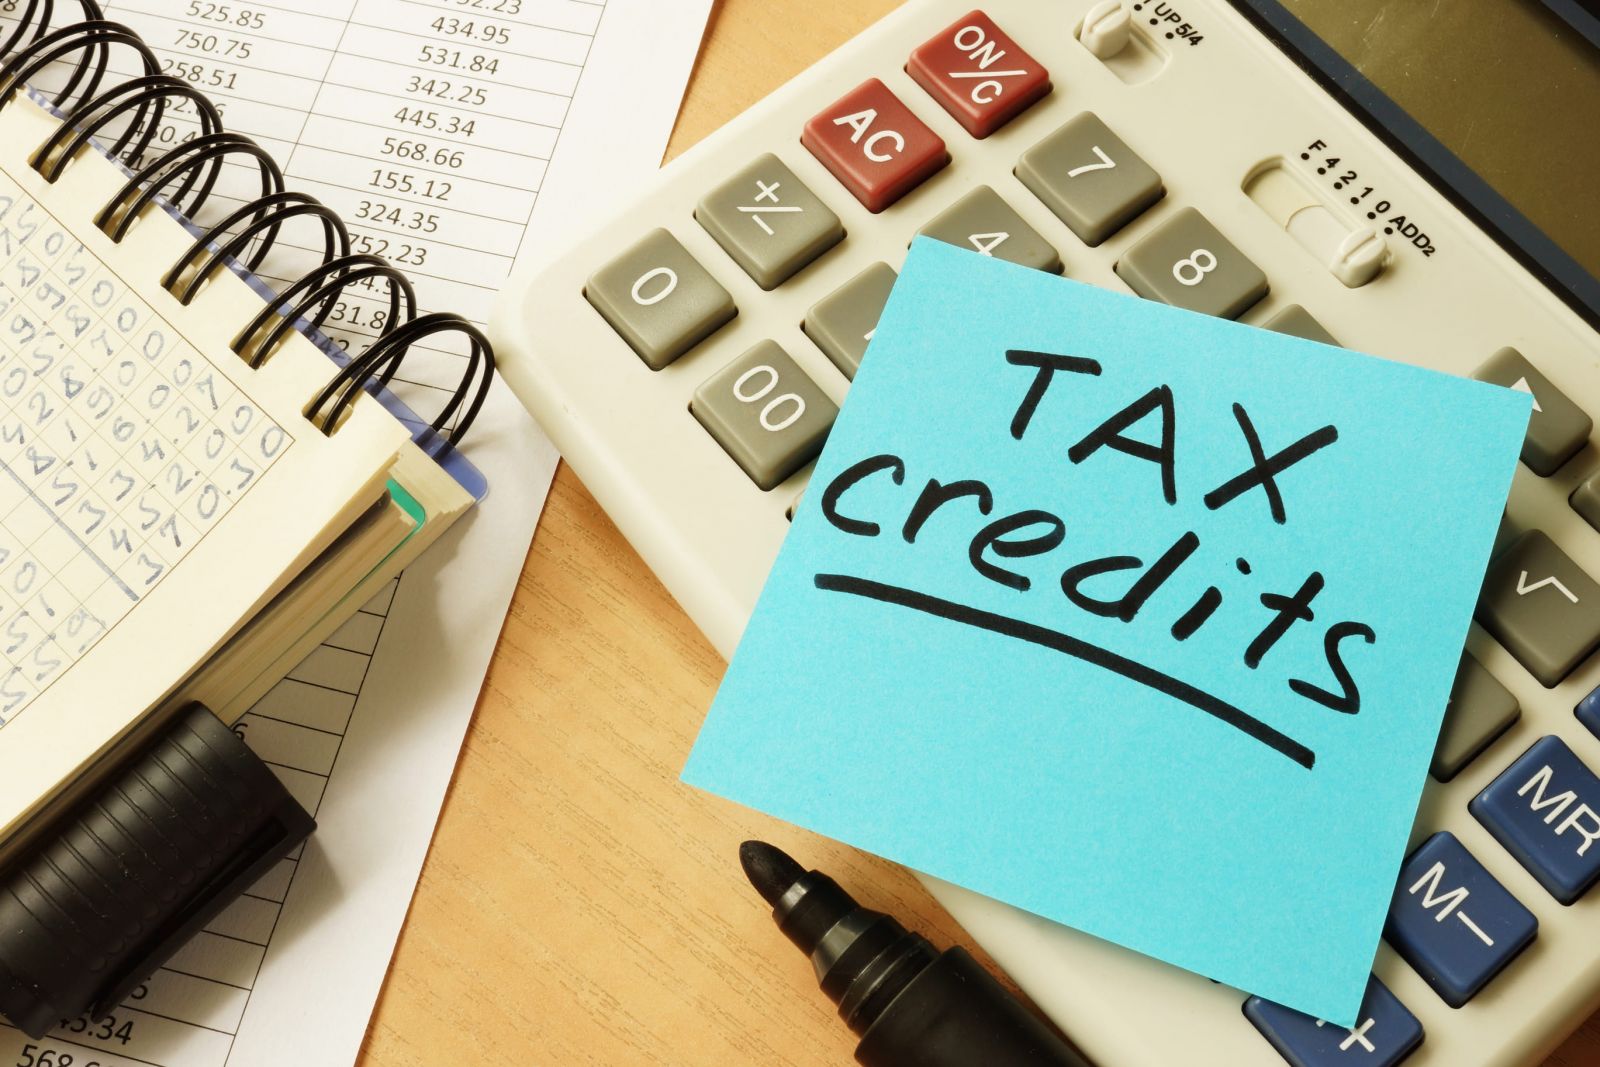 Having assistance with your tax preparation means a better chance of getting all of the tax credits you deserve!